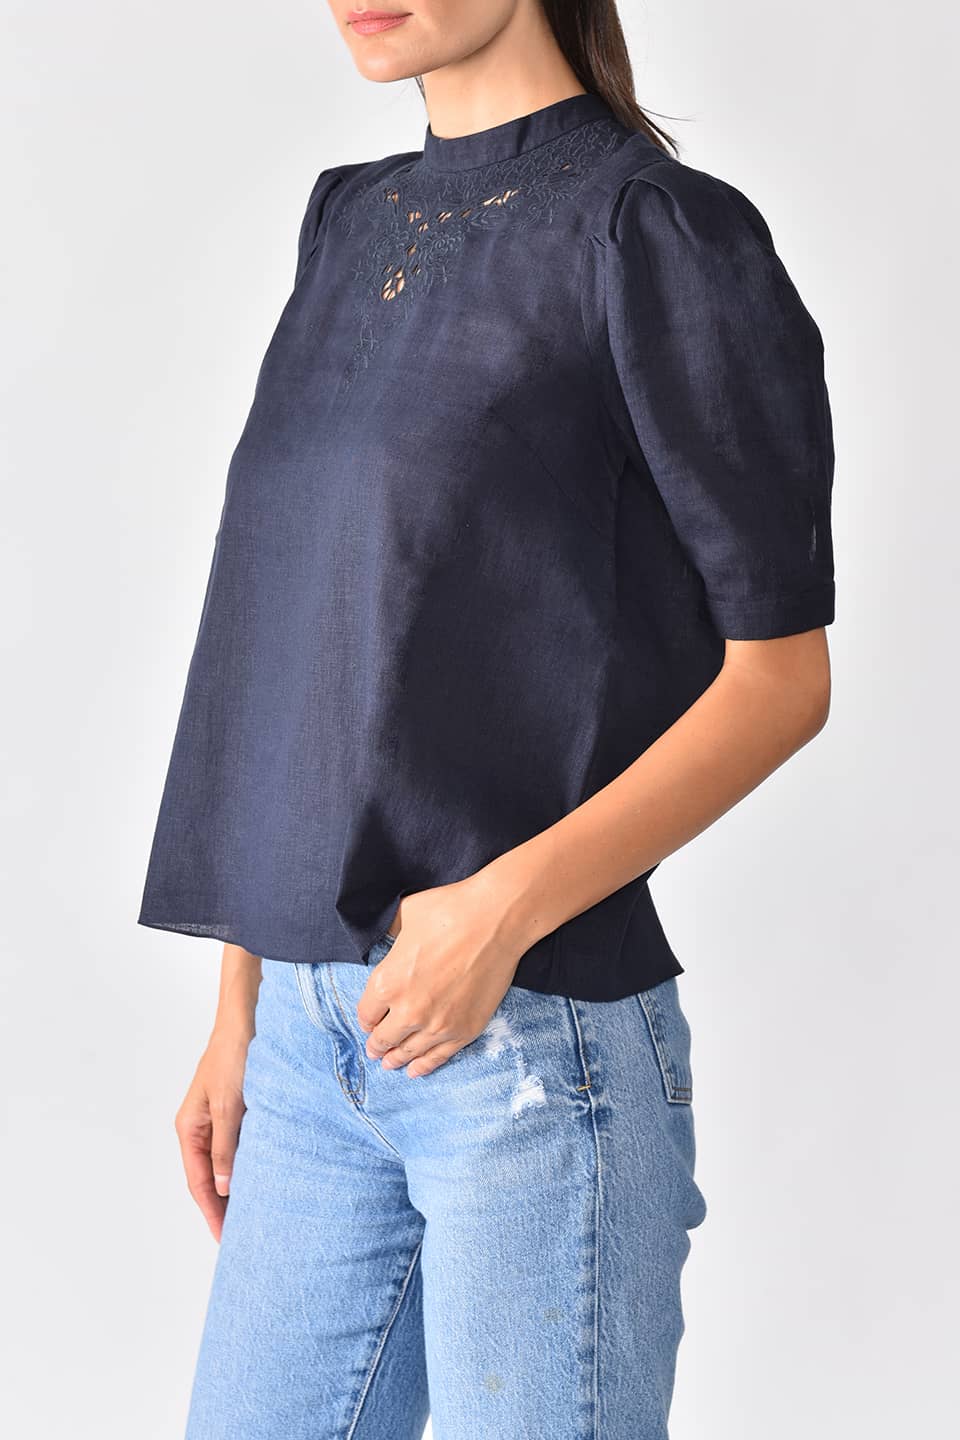 Model wears navy linen top with floral cutout embroidery from stylist Vilshenko, posing on left side